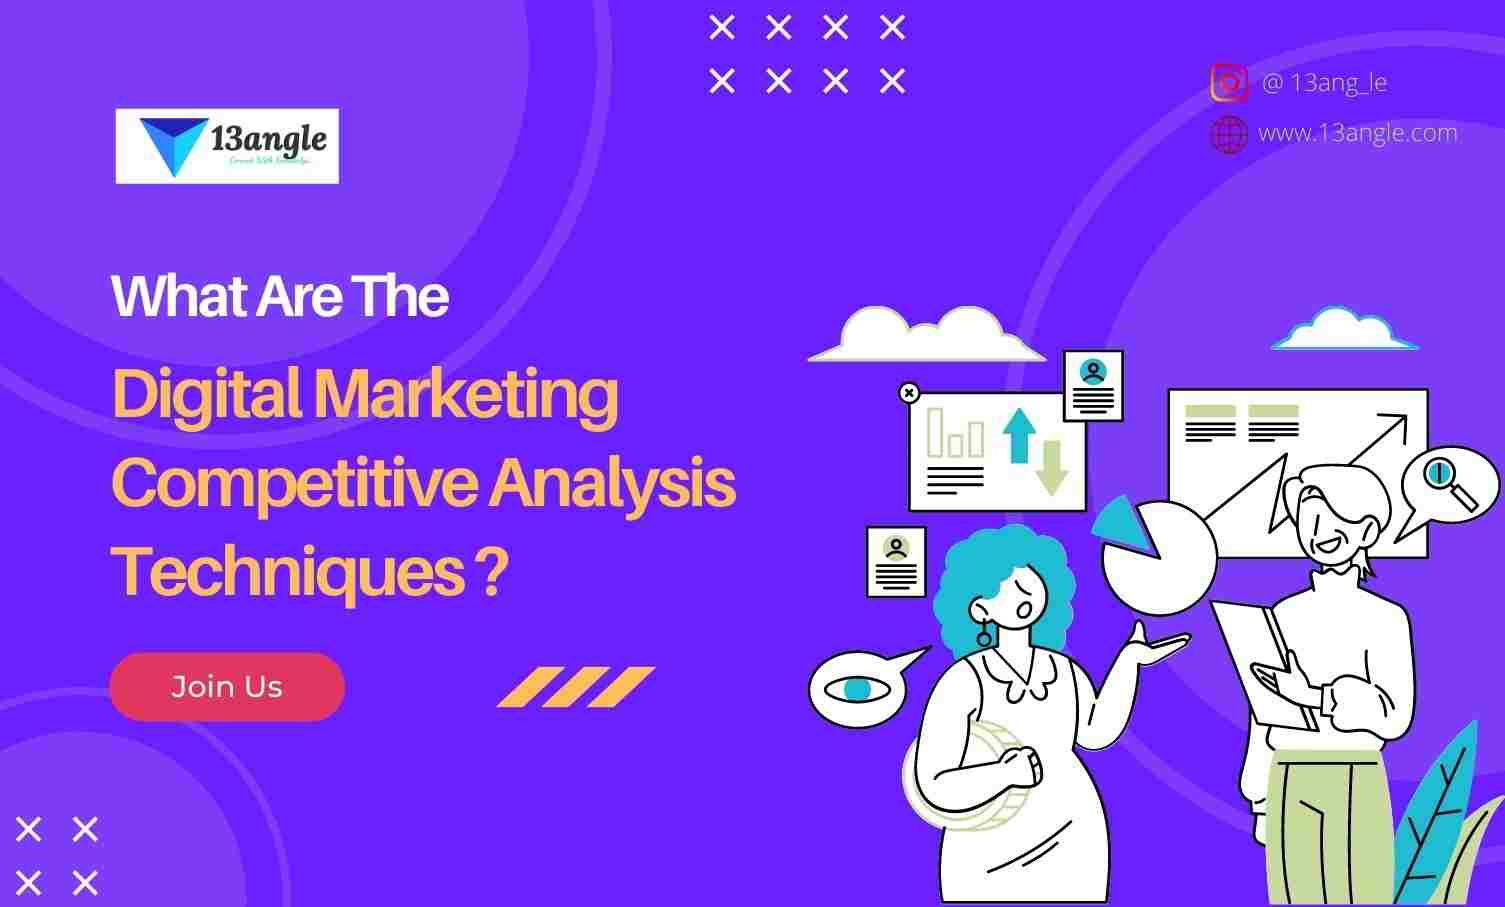 What Are The Digital Marketing Competitive Analysis Techniques- 13angle.com